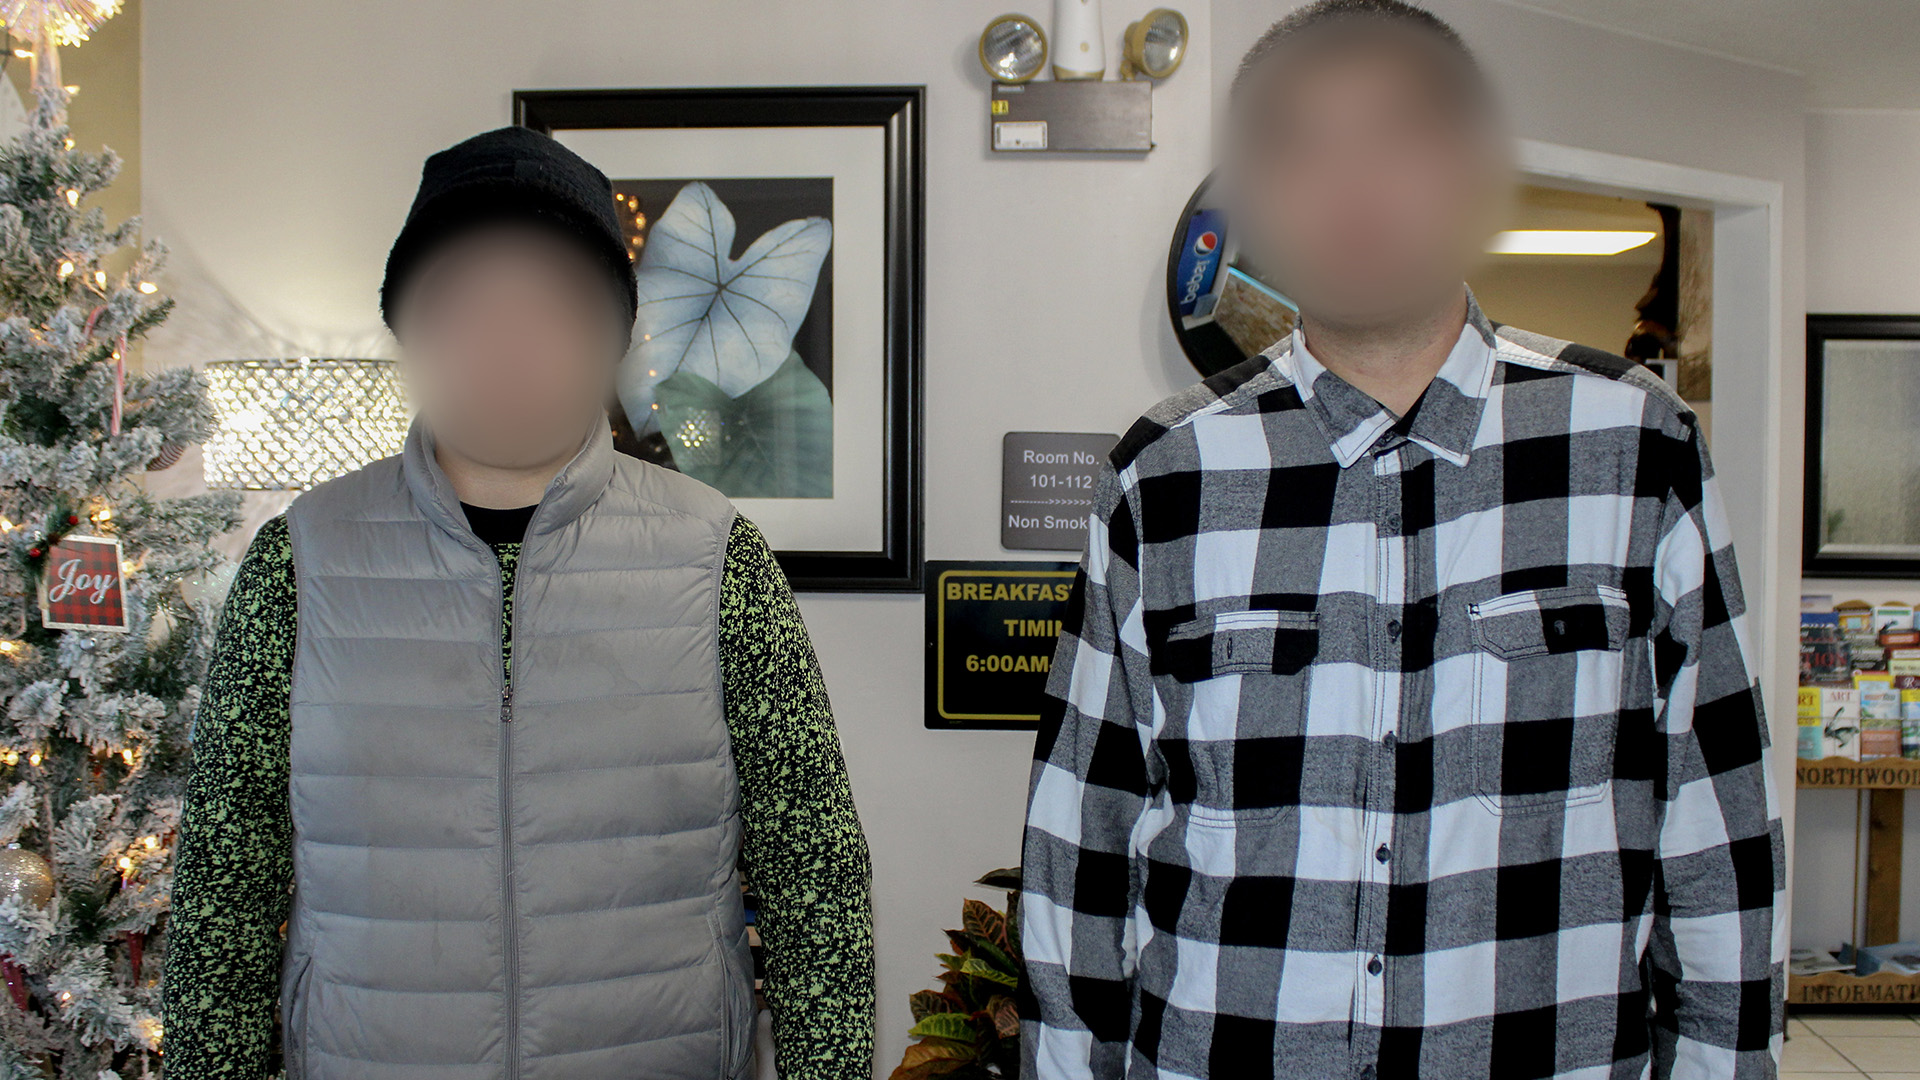 Aaron and Justin, appearing with blurry spots over their faces, posed for a portrait in a room with a Christmas tree, rack of tourism pamphlets and signs referencing motel room locations and breakfast times.